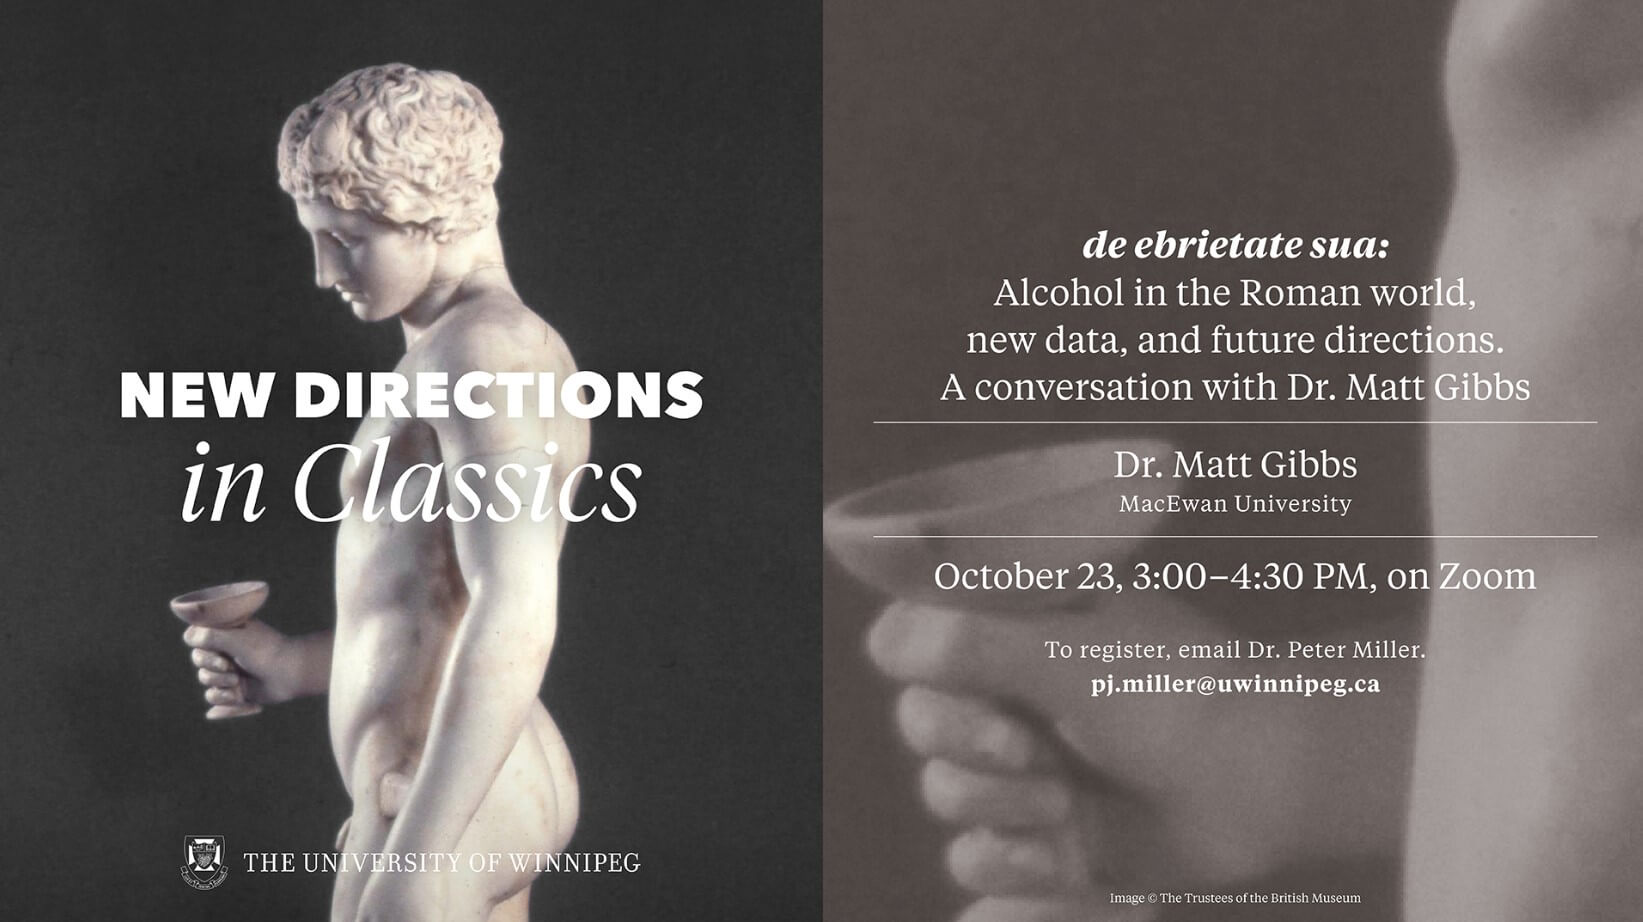 Promotional image for Dr. Matt Gibbs' talk on October 23, full text on web page